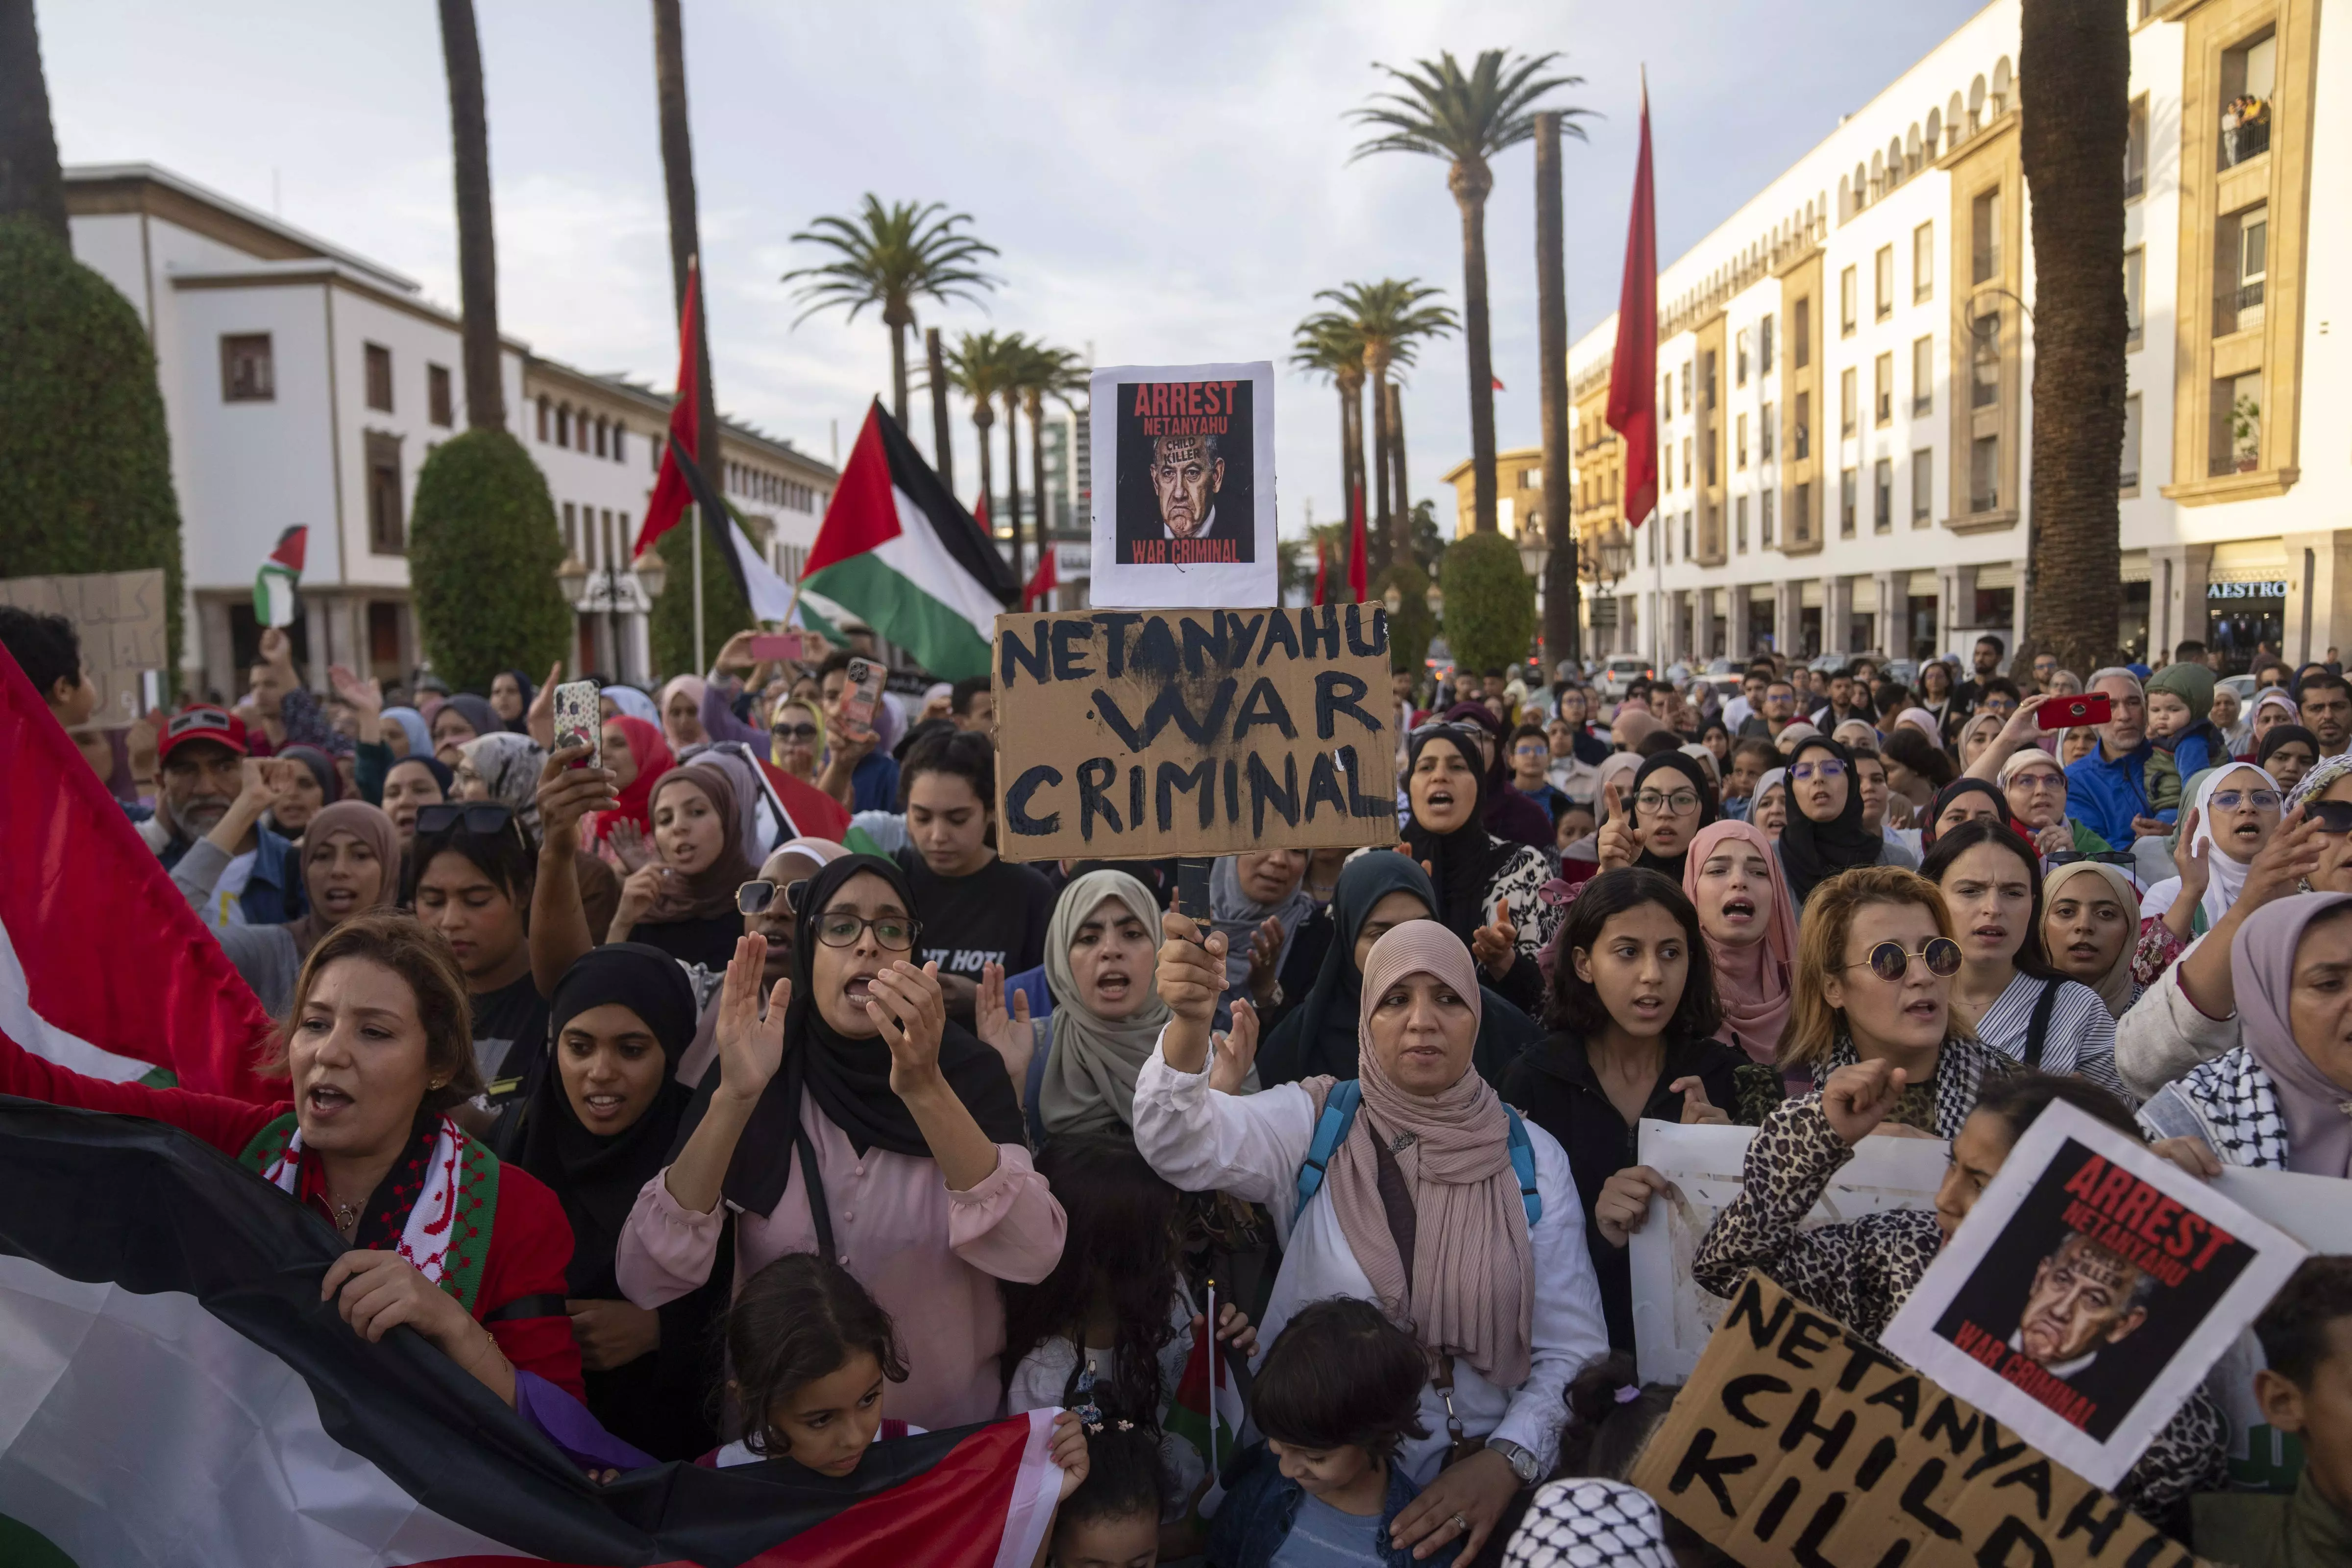 Hundreds of Moroccans carry Palestinian flags and shout slogans as they gather in solidarity with Palestinians in Gaza, in Rabat, Morocco, on Oct 18 | AP/PTI